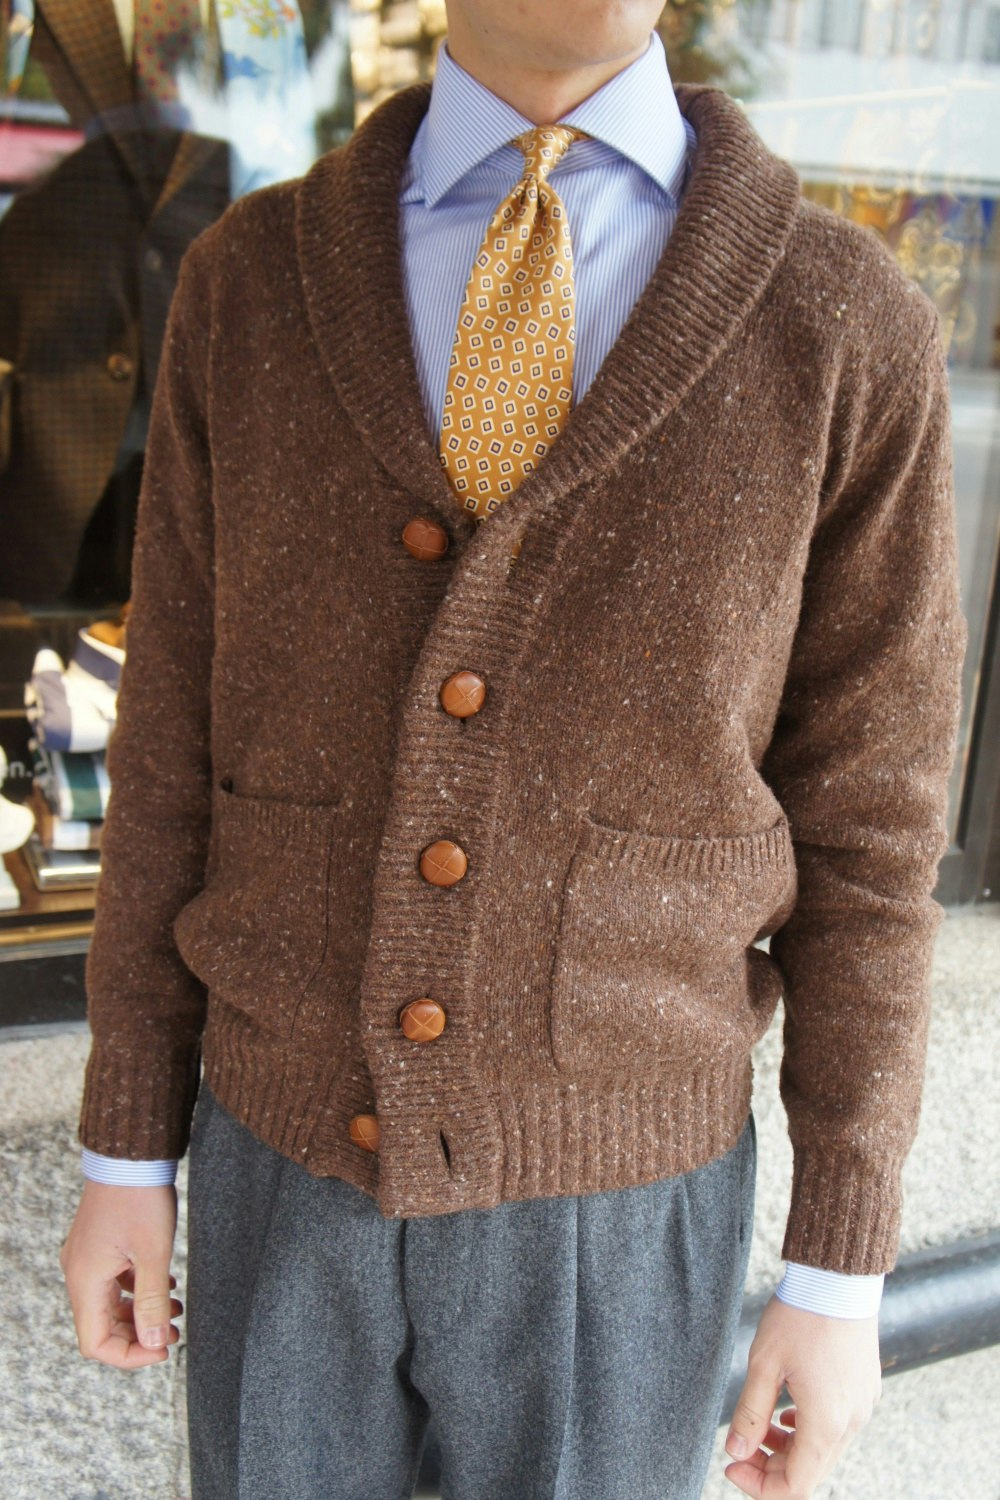 Donegal Cashmere Blend Shawl Cardigan - Brown